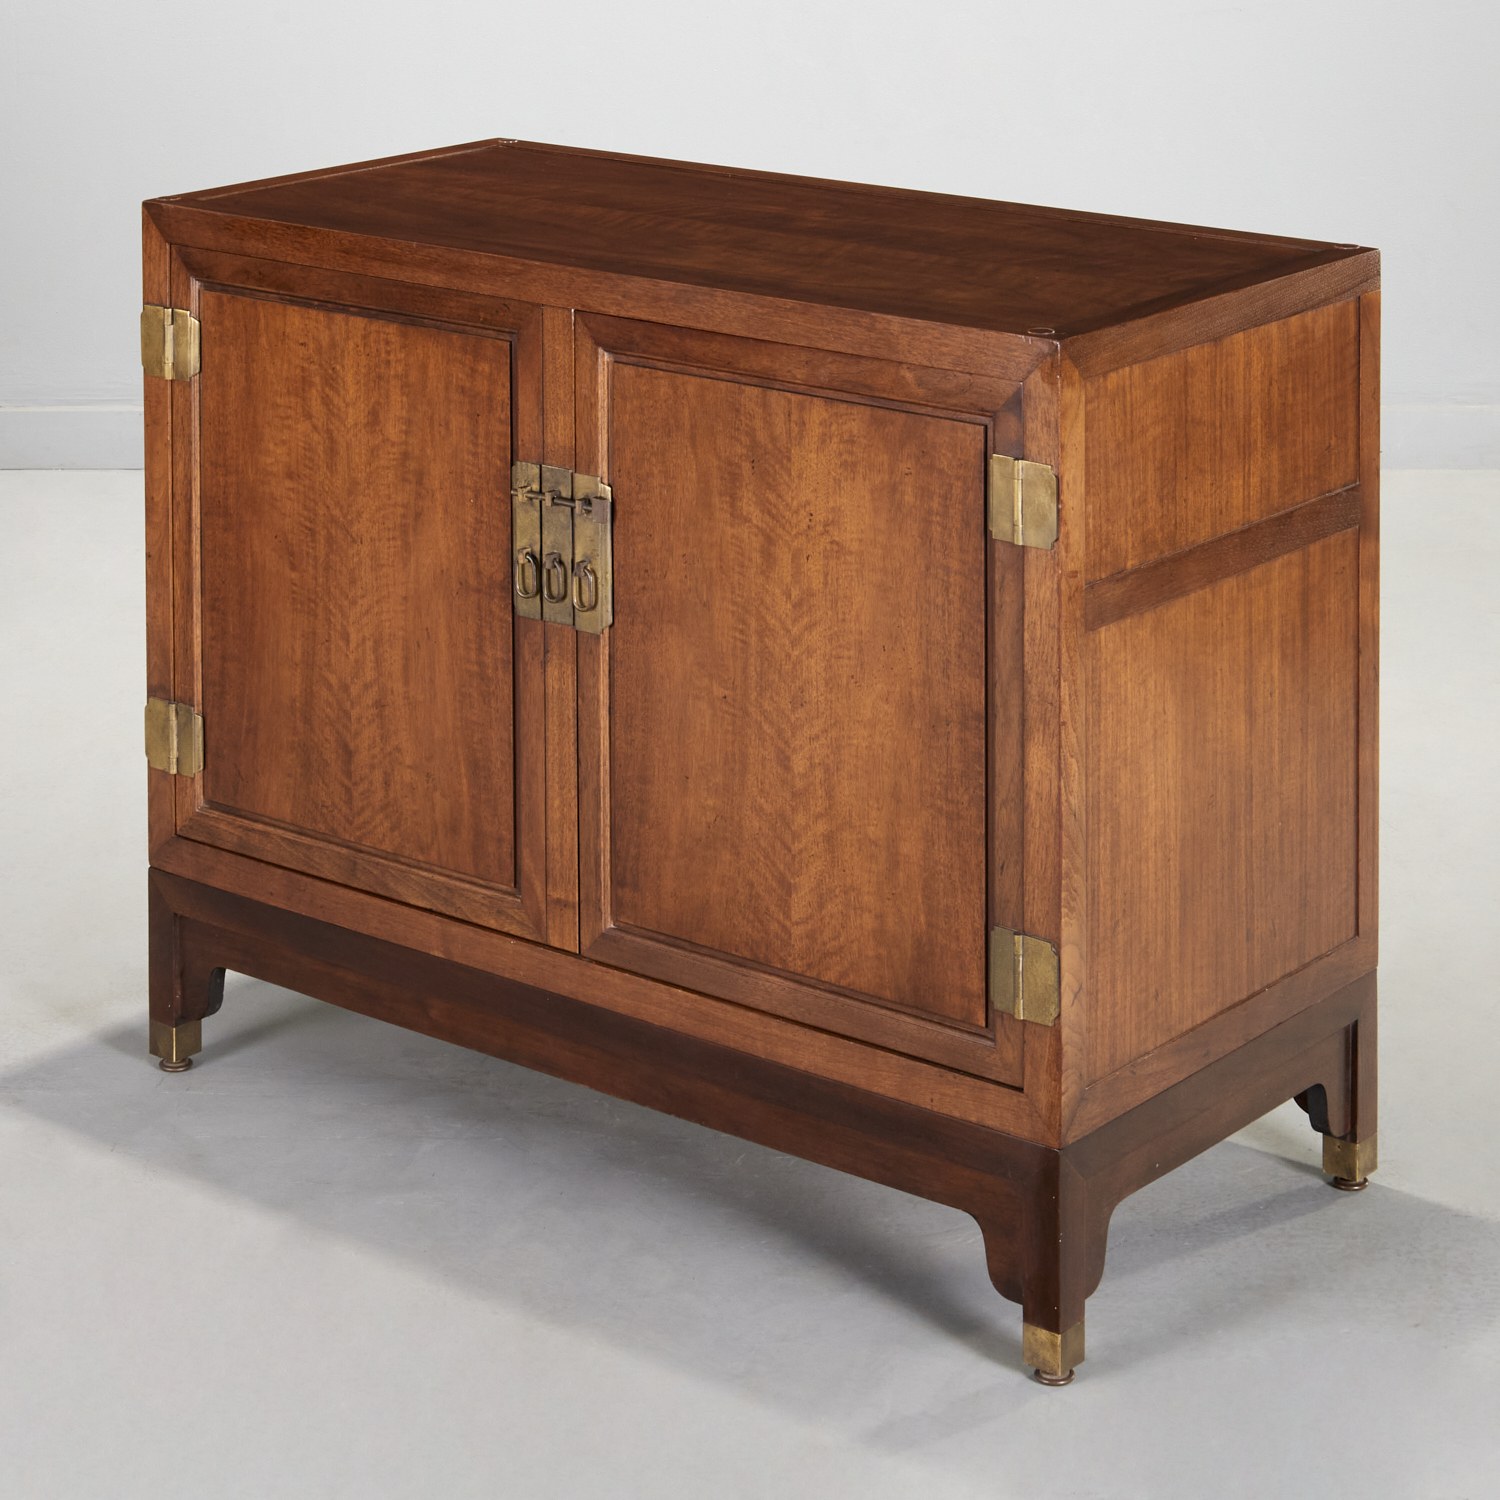 BAKER CHINESE STYLE CABINET ON